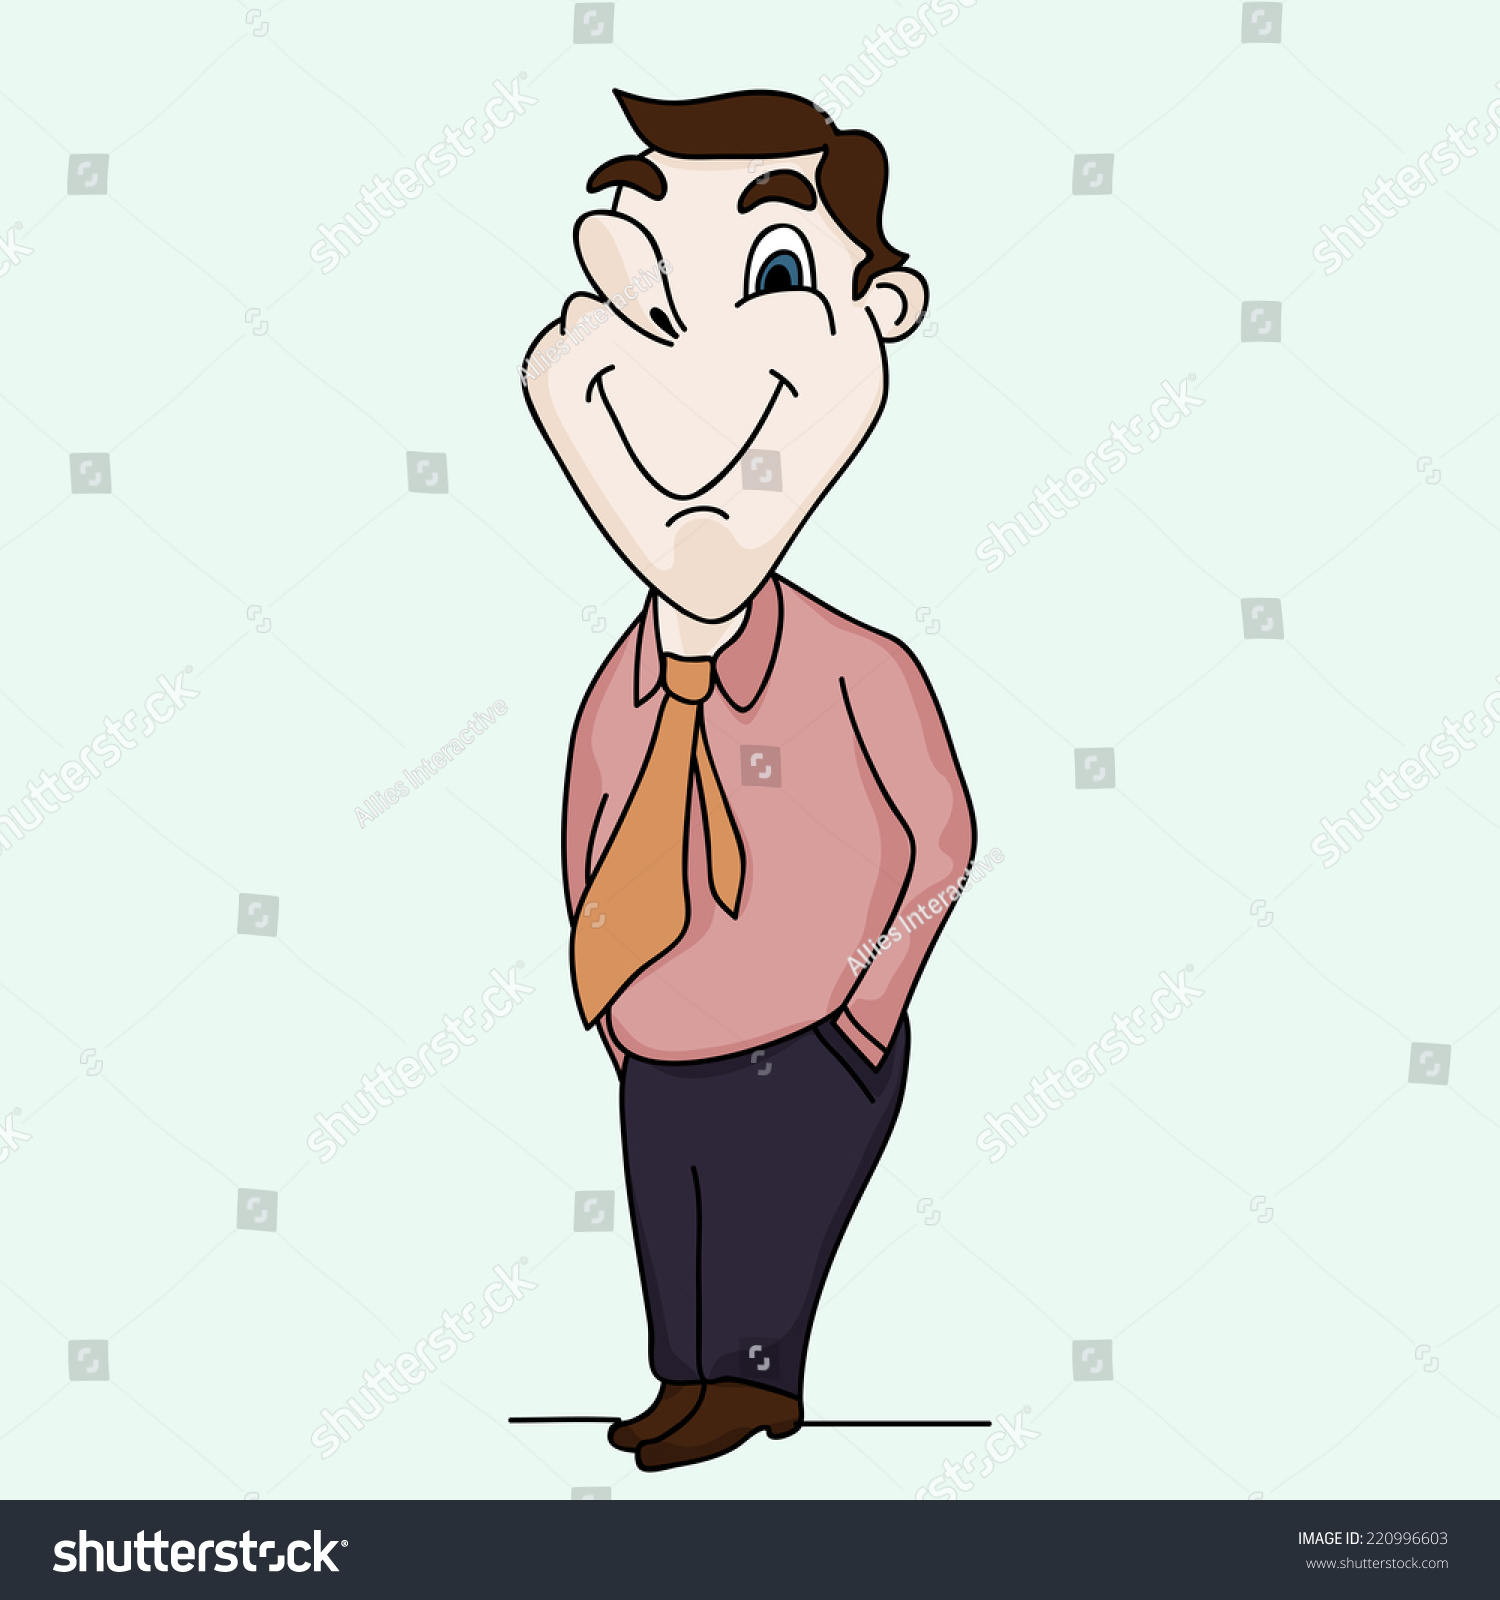 Smiling Cartoon Character Of A Man Wearing Paint,Shirt, Tie And Shoes ...